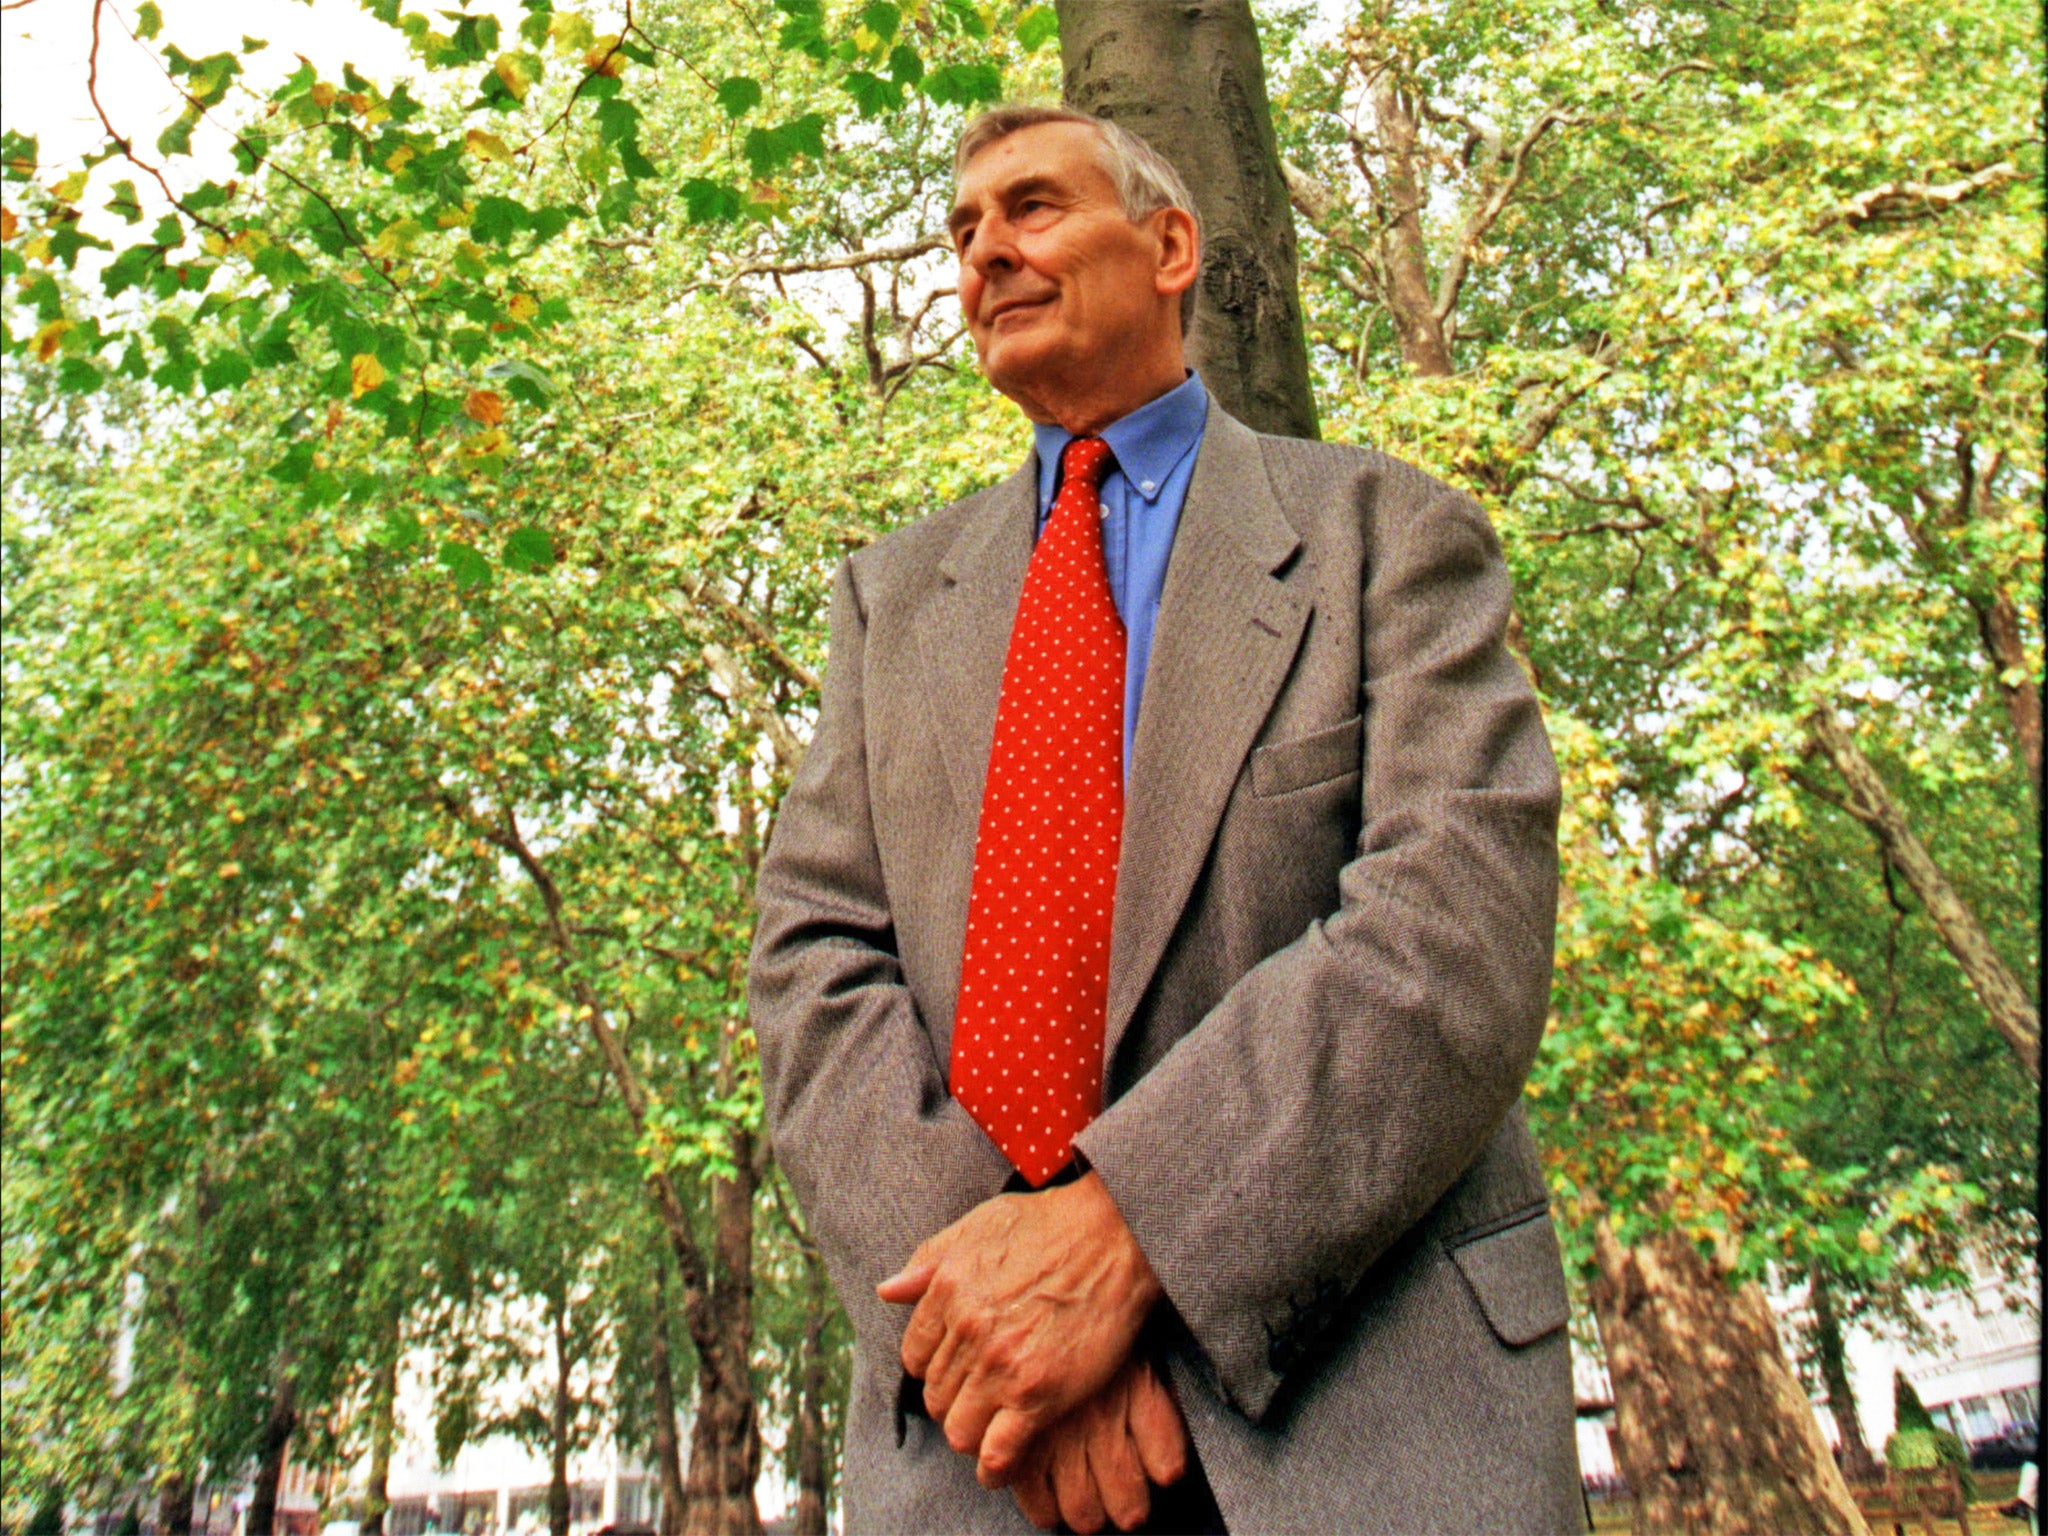 McGill in Hyde Park in 1987, during his tree-planting appeal following the Great Storm